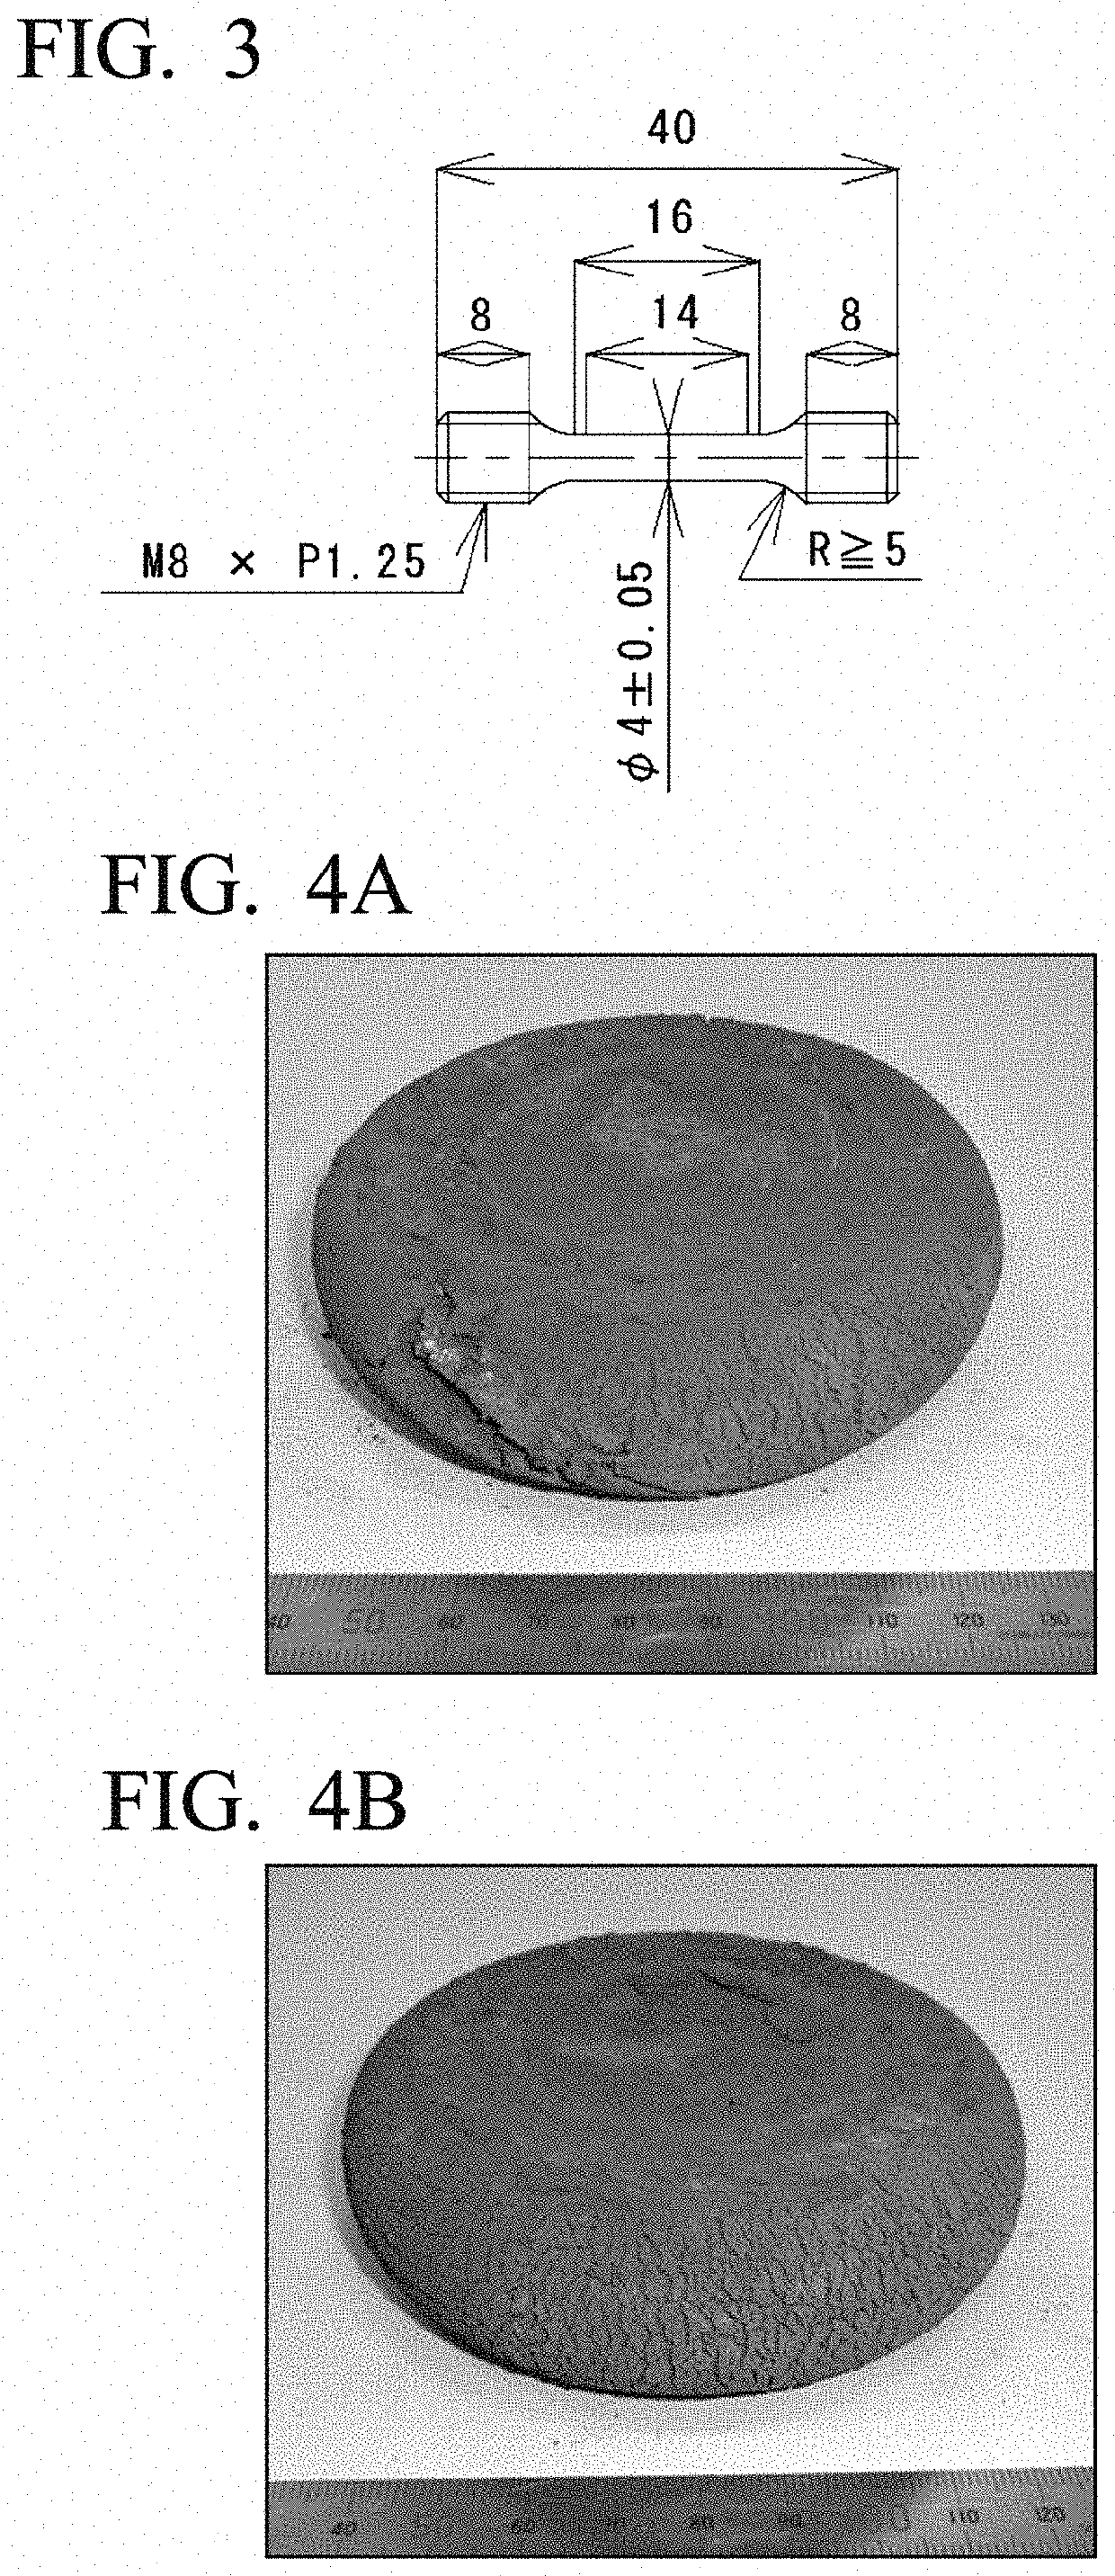 Hot-forged tial-based alloy, method for producing same, and uses for same